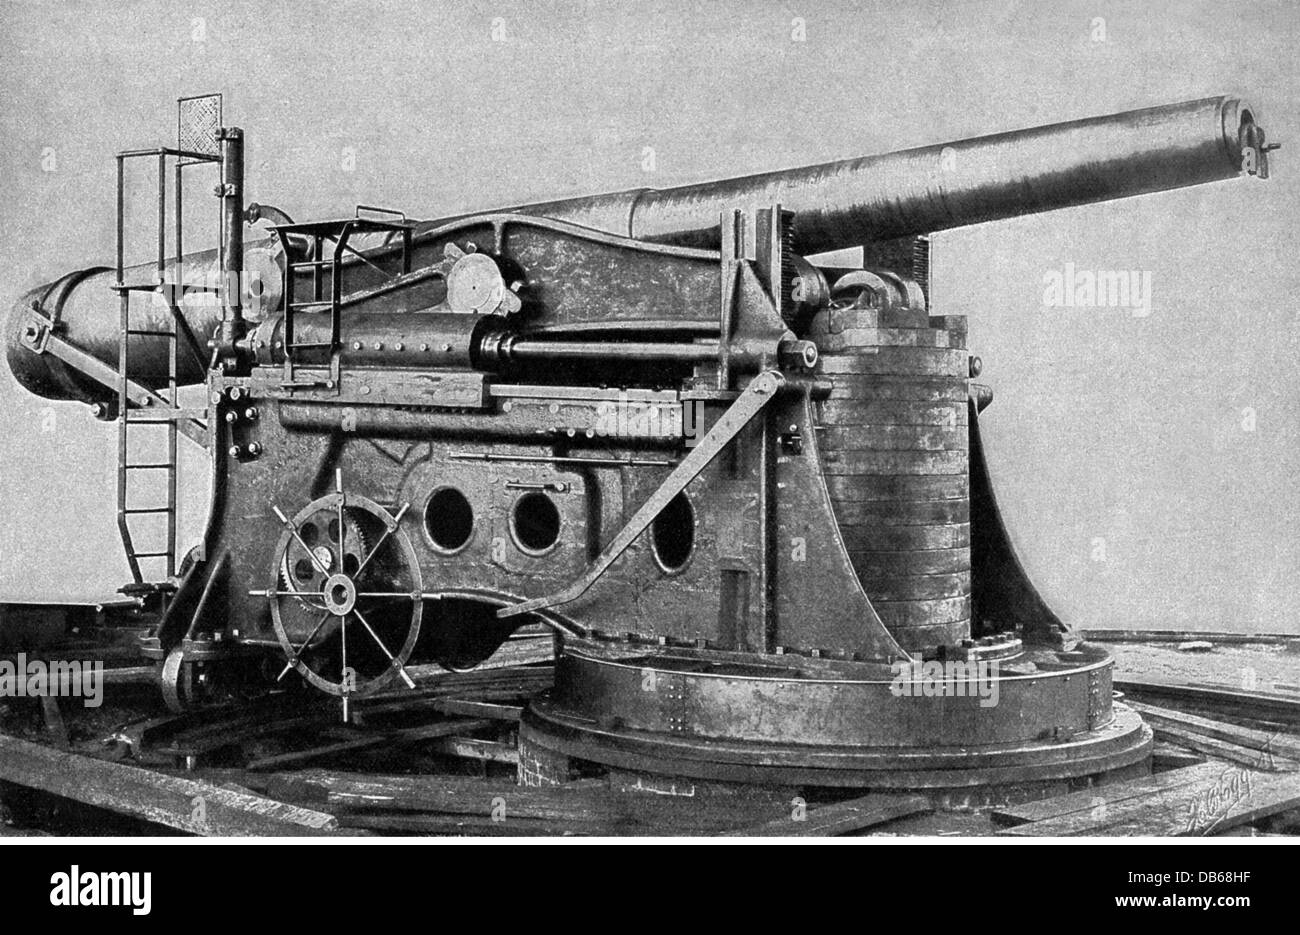 military, artillery, USA, 12 inch coastal gun in firing position, 1901, Additional-Rights-Clearences-Not Available Stock Photo